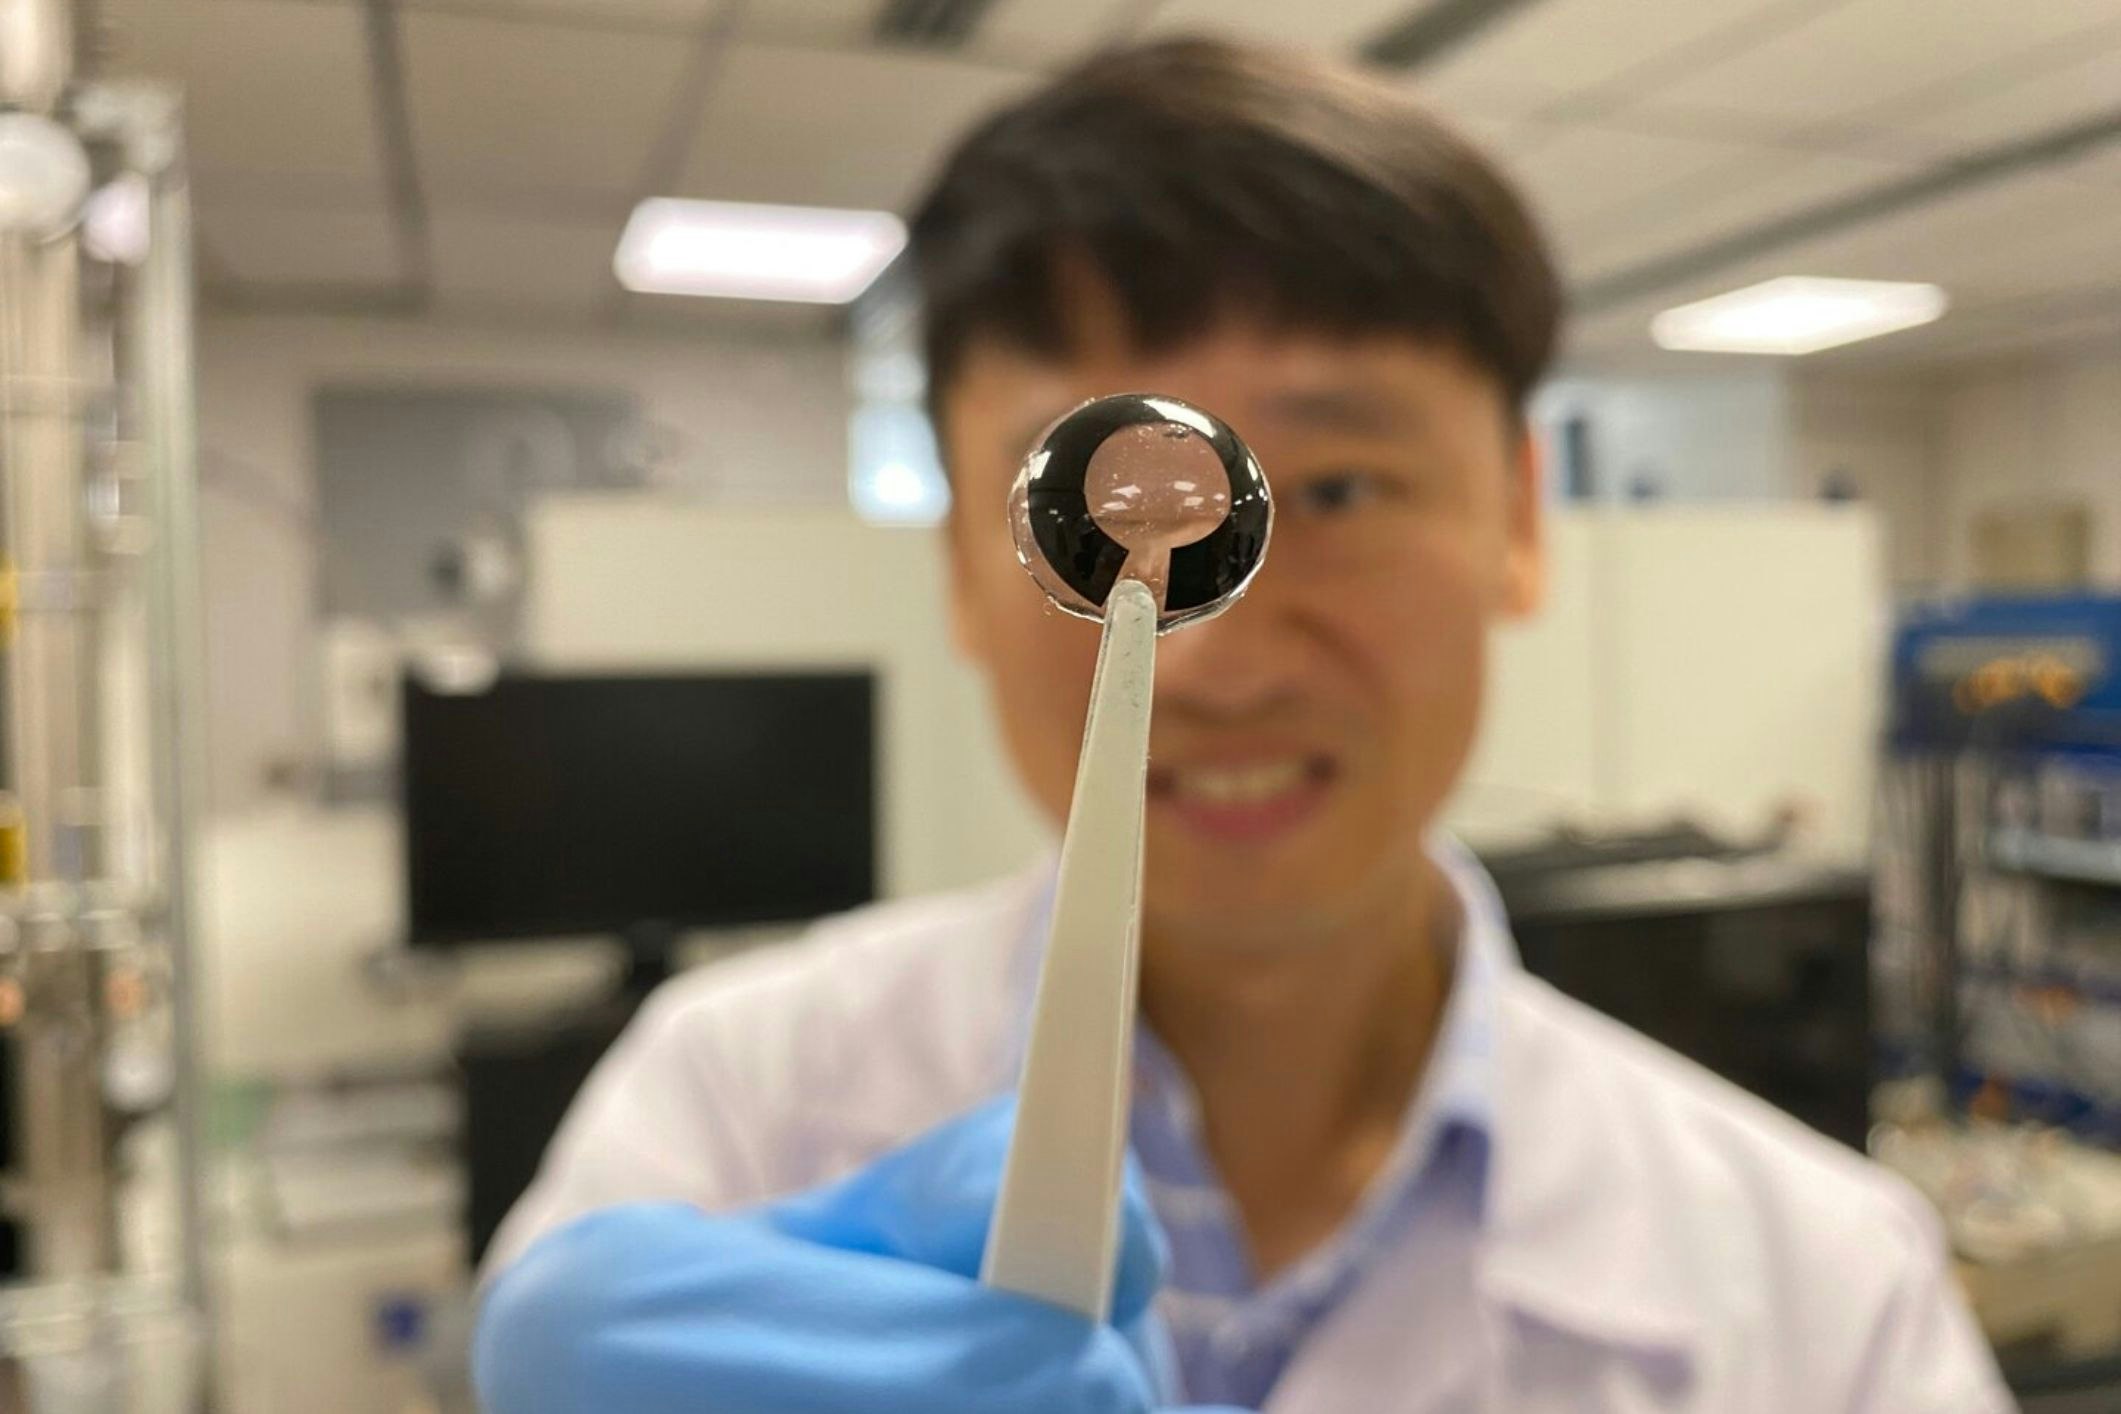 Scientists pondered the possibility of tears to recharge smart contact lenses and that led to a technological breakthrough that could aid people living with vision impairment. [Source: Nanyang Technological University, Singapore]
